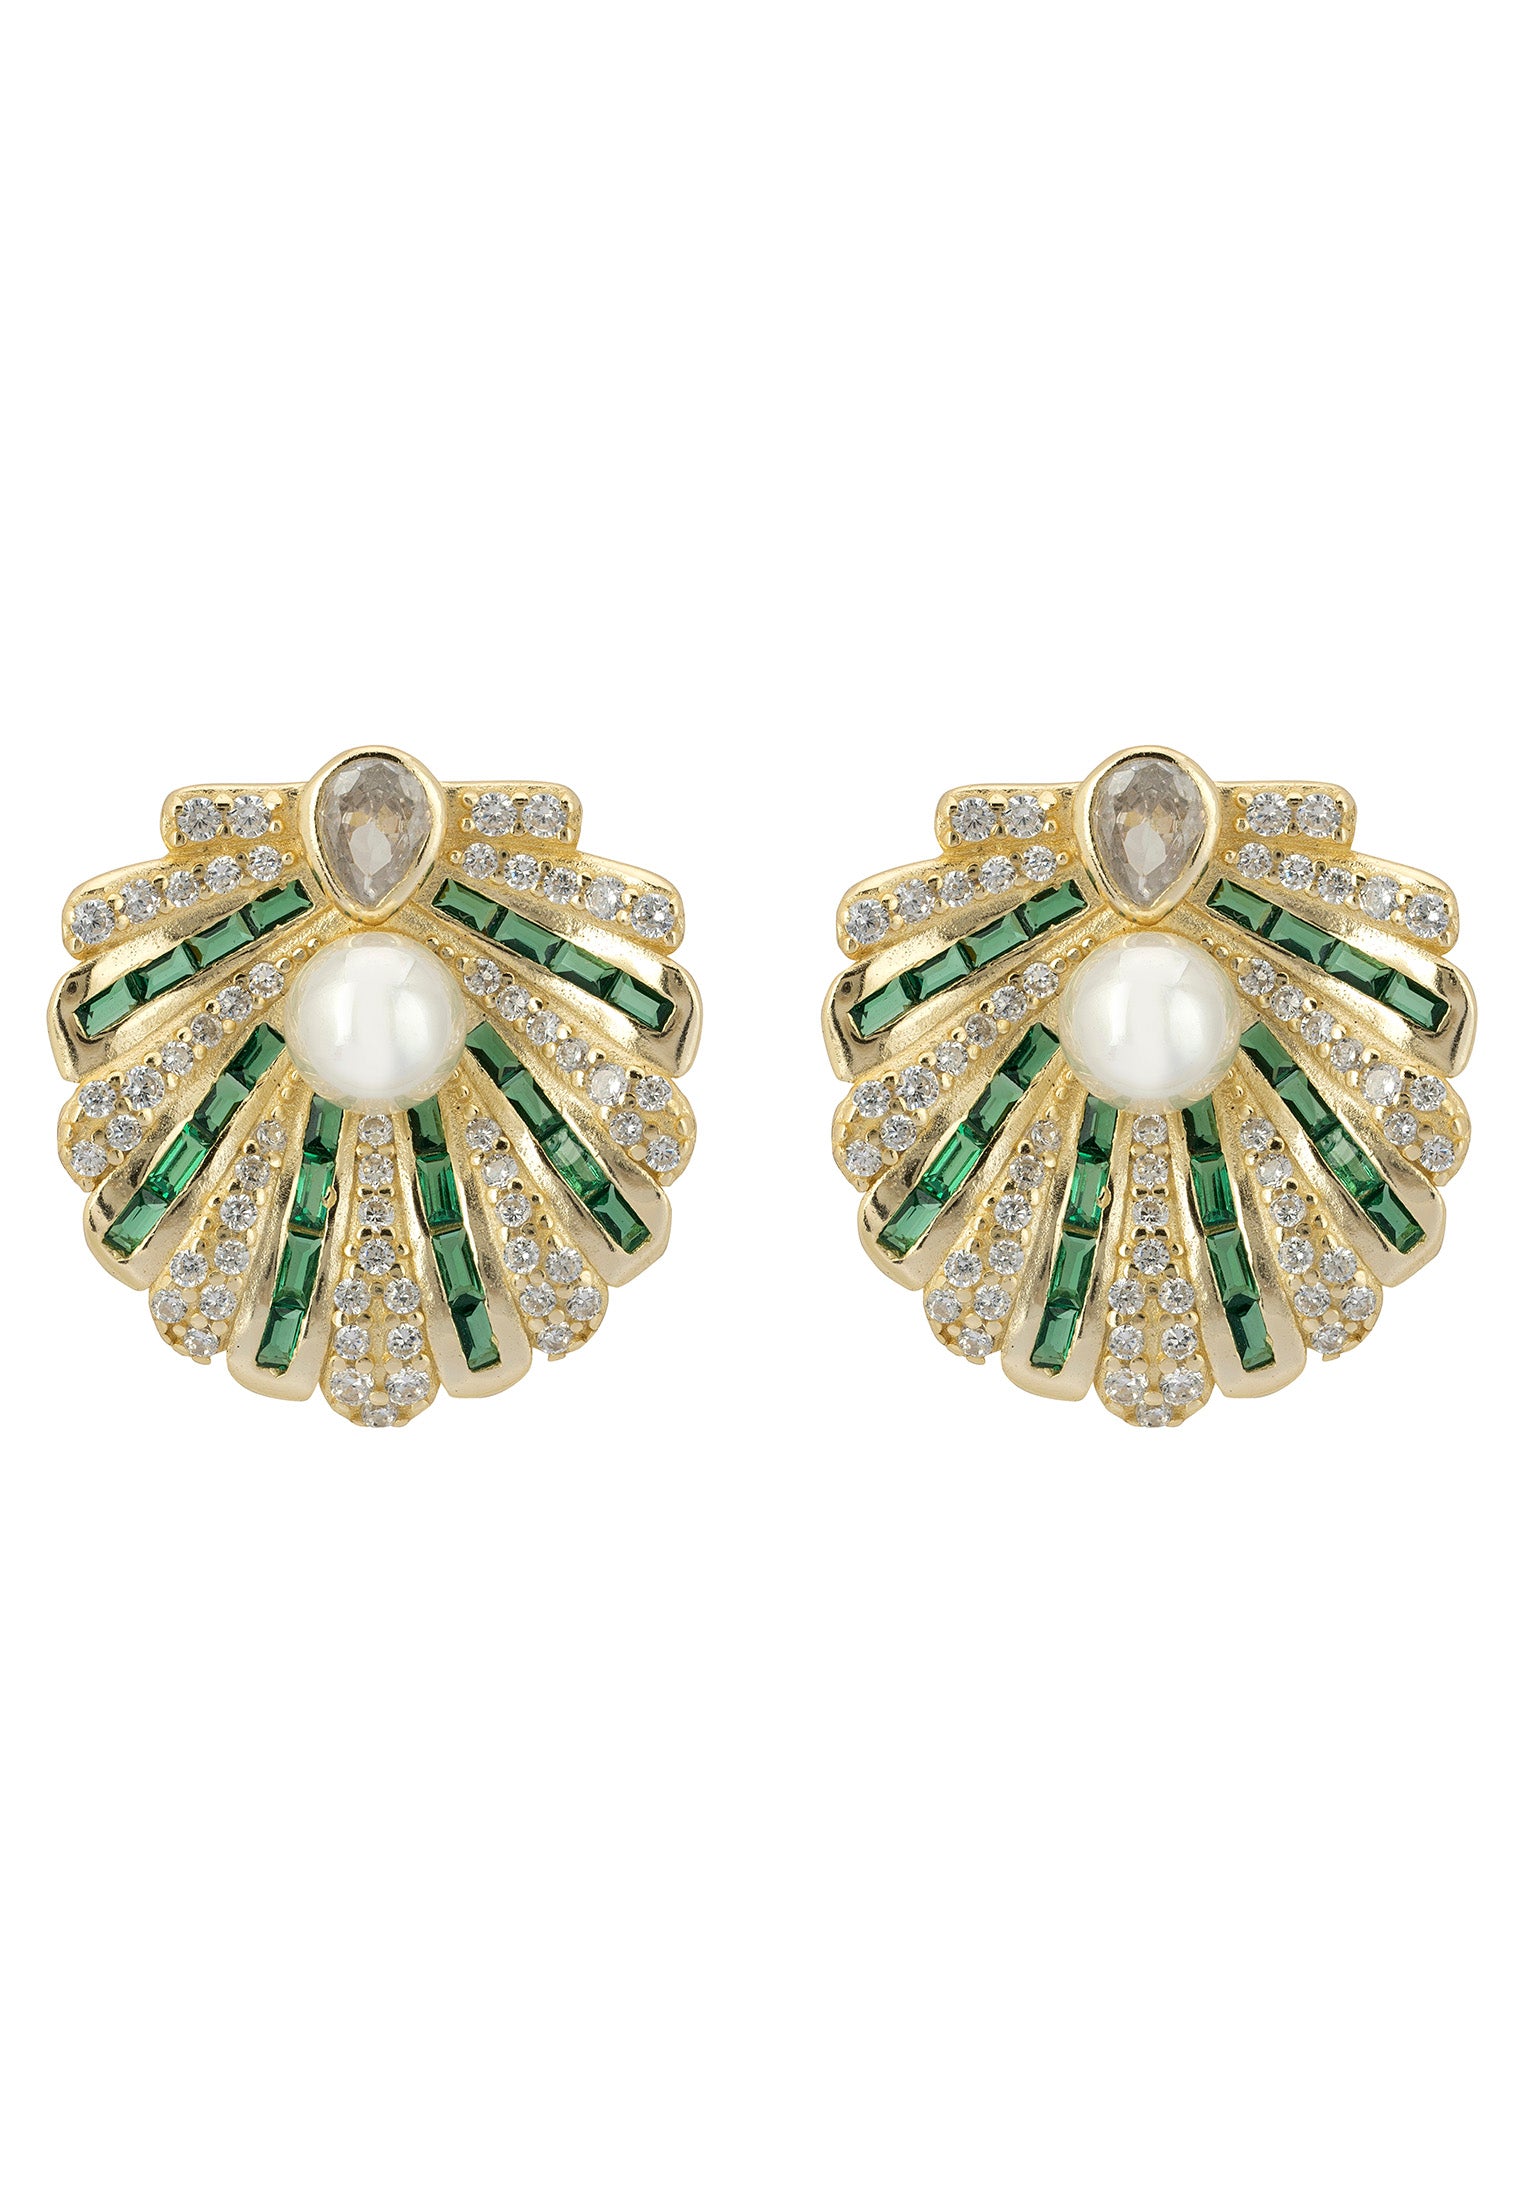 Art Deco Scallop Shell Earrings Emerald Green With Pearl Gold